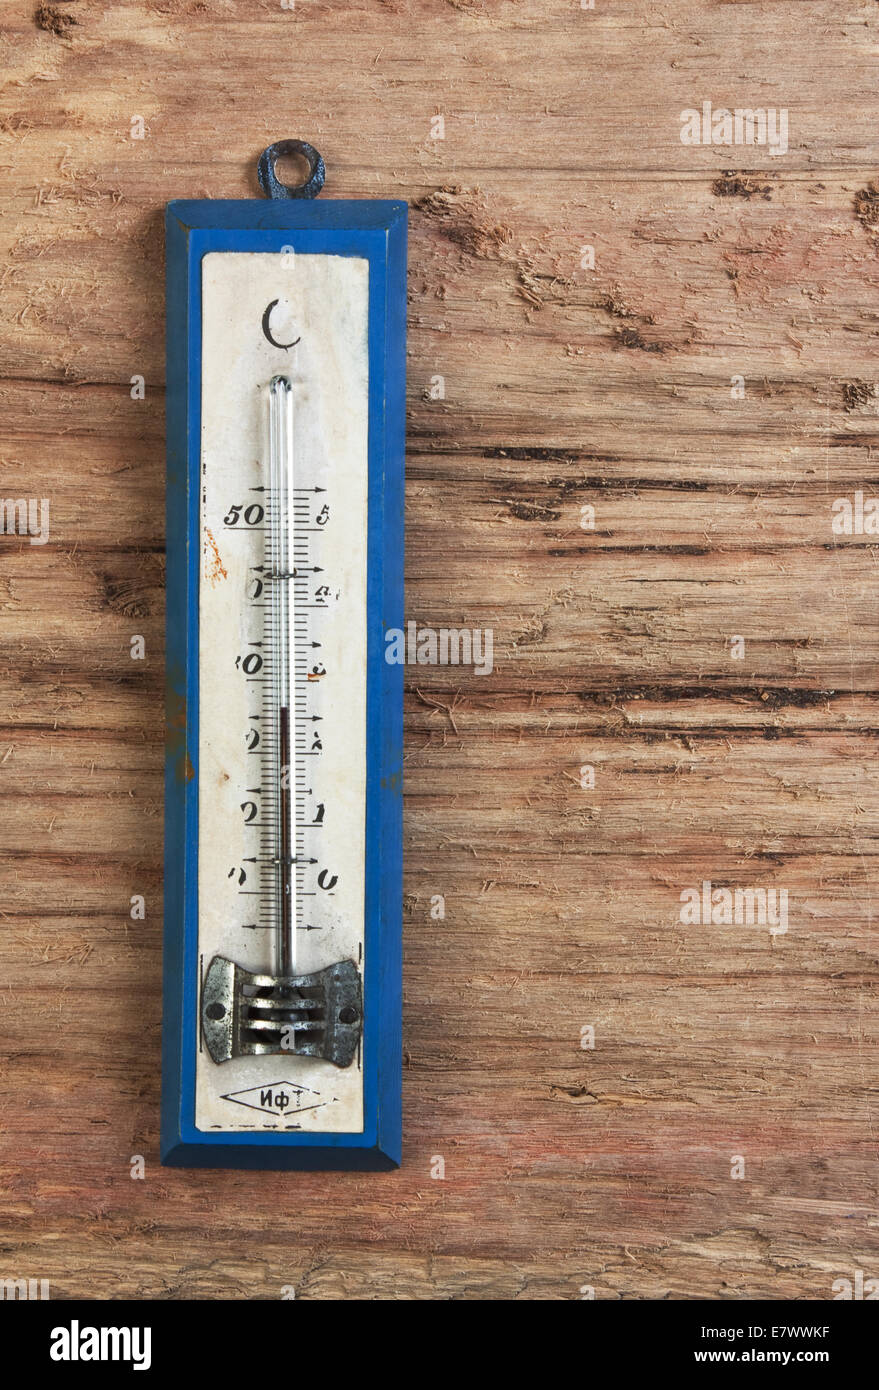 https://c8.alamy.com/comp/E7WWKF/old-thermometer-on-a-wooden-background-E7WWKF.jpg